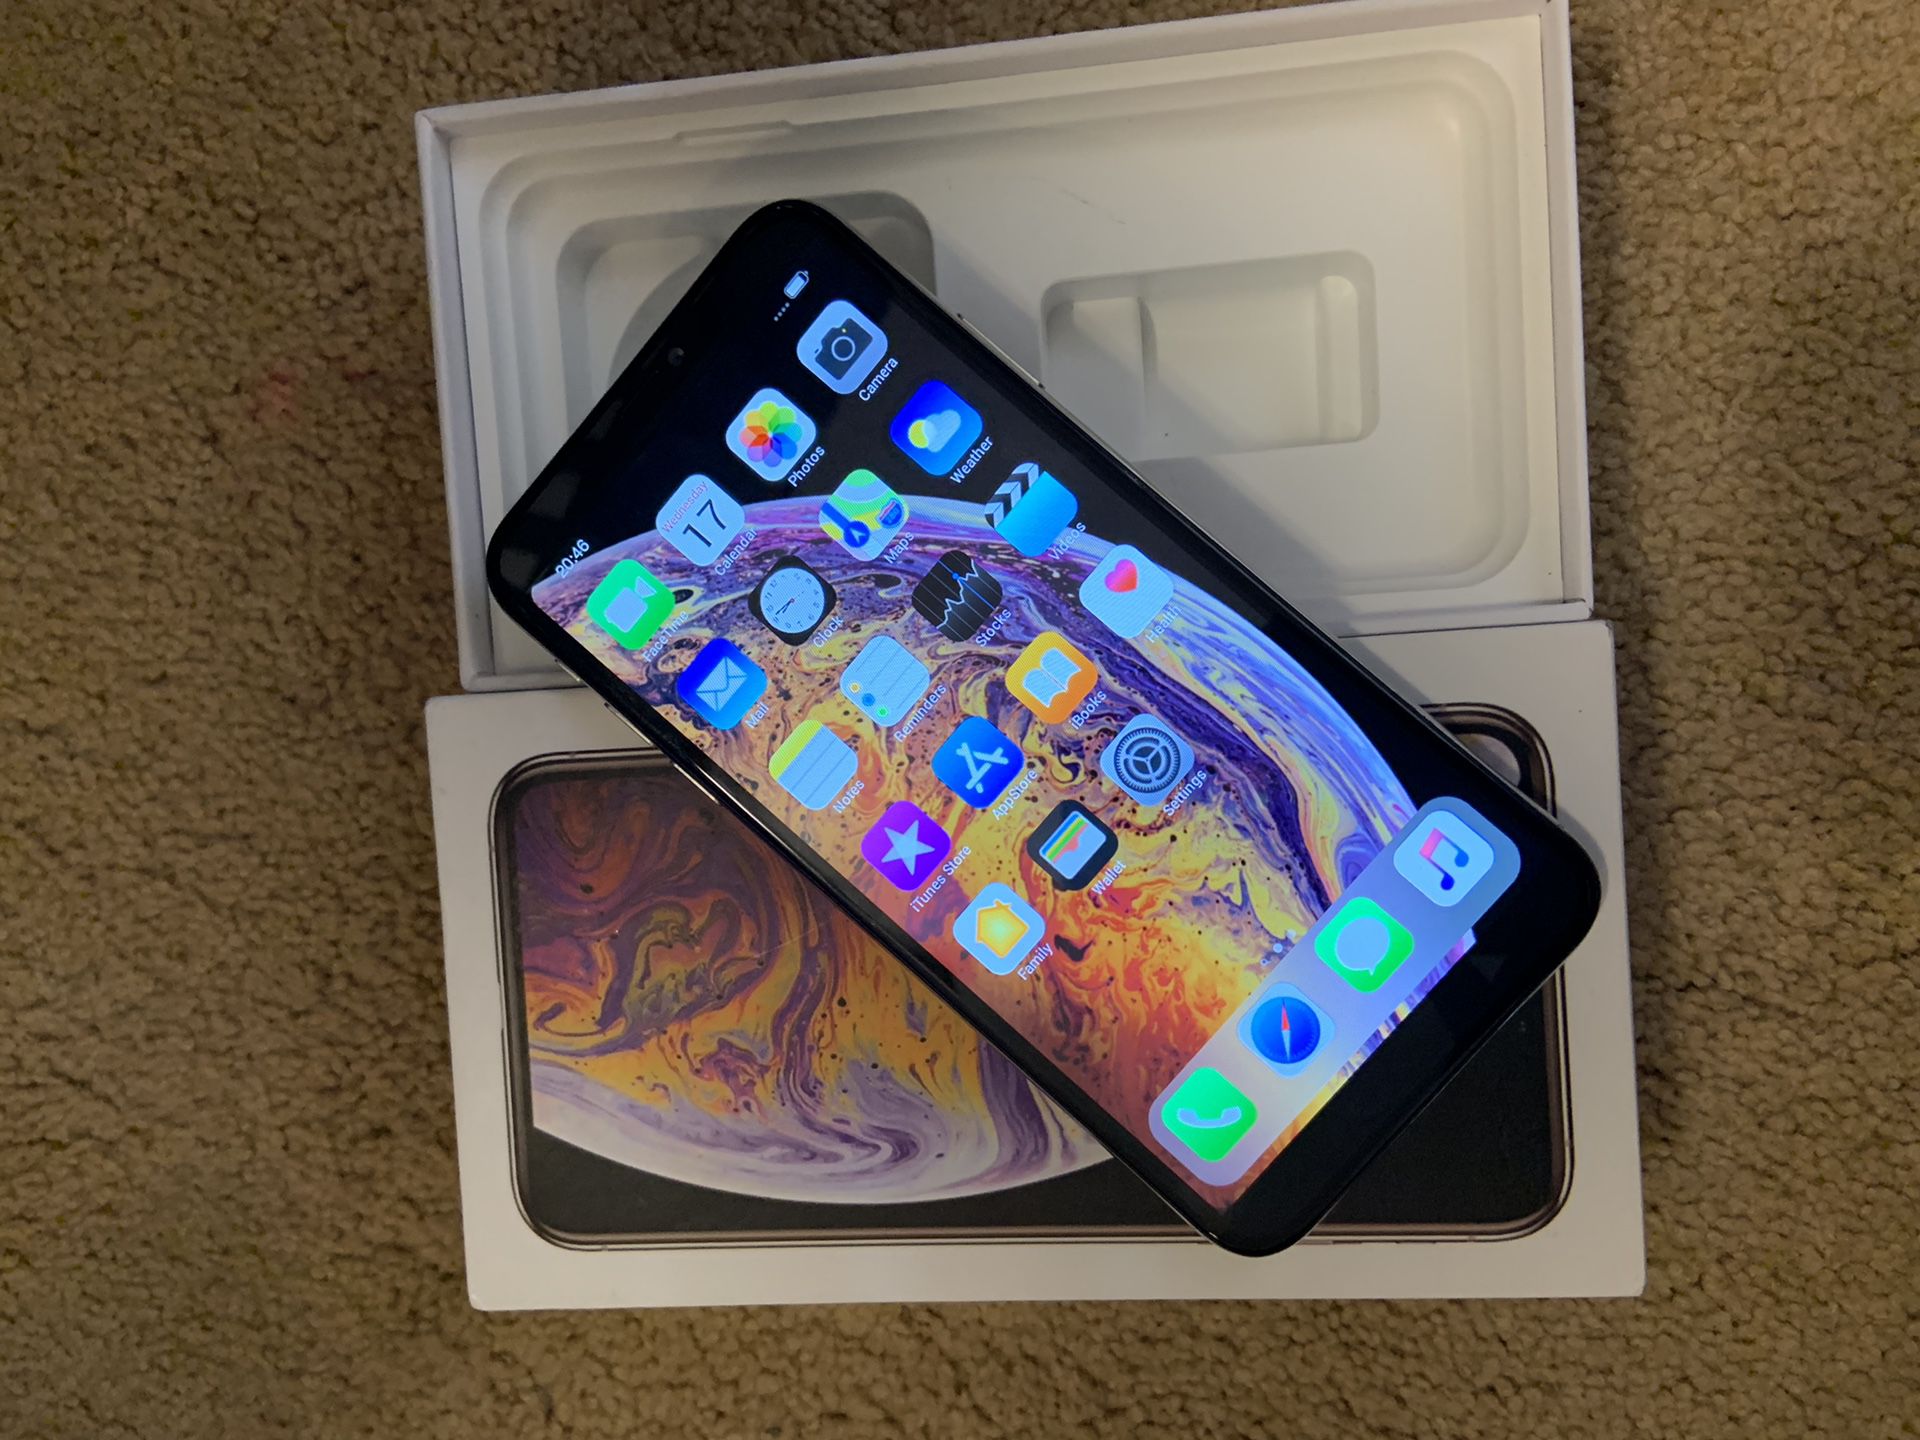 IPhone Xsmax 512GB fully unlocked best offer